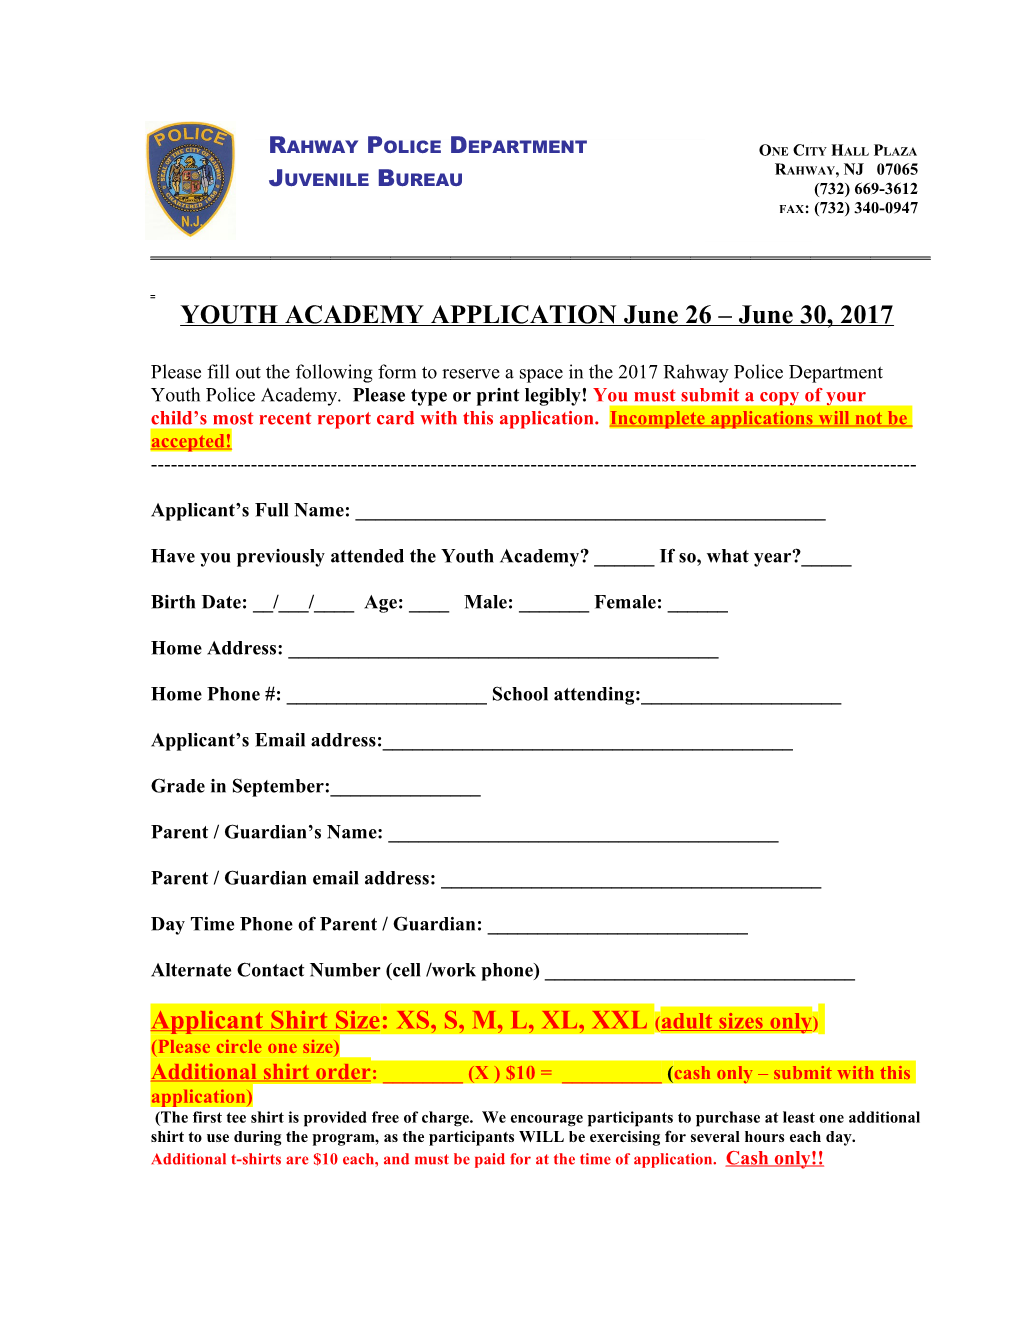 YOUTH ACADEMY APPLICATION June 26 June 30, 2017